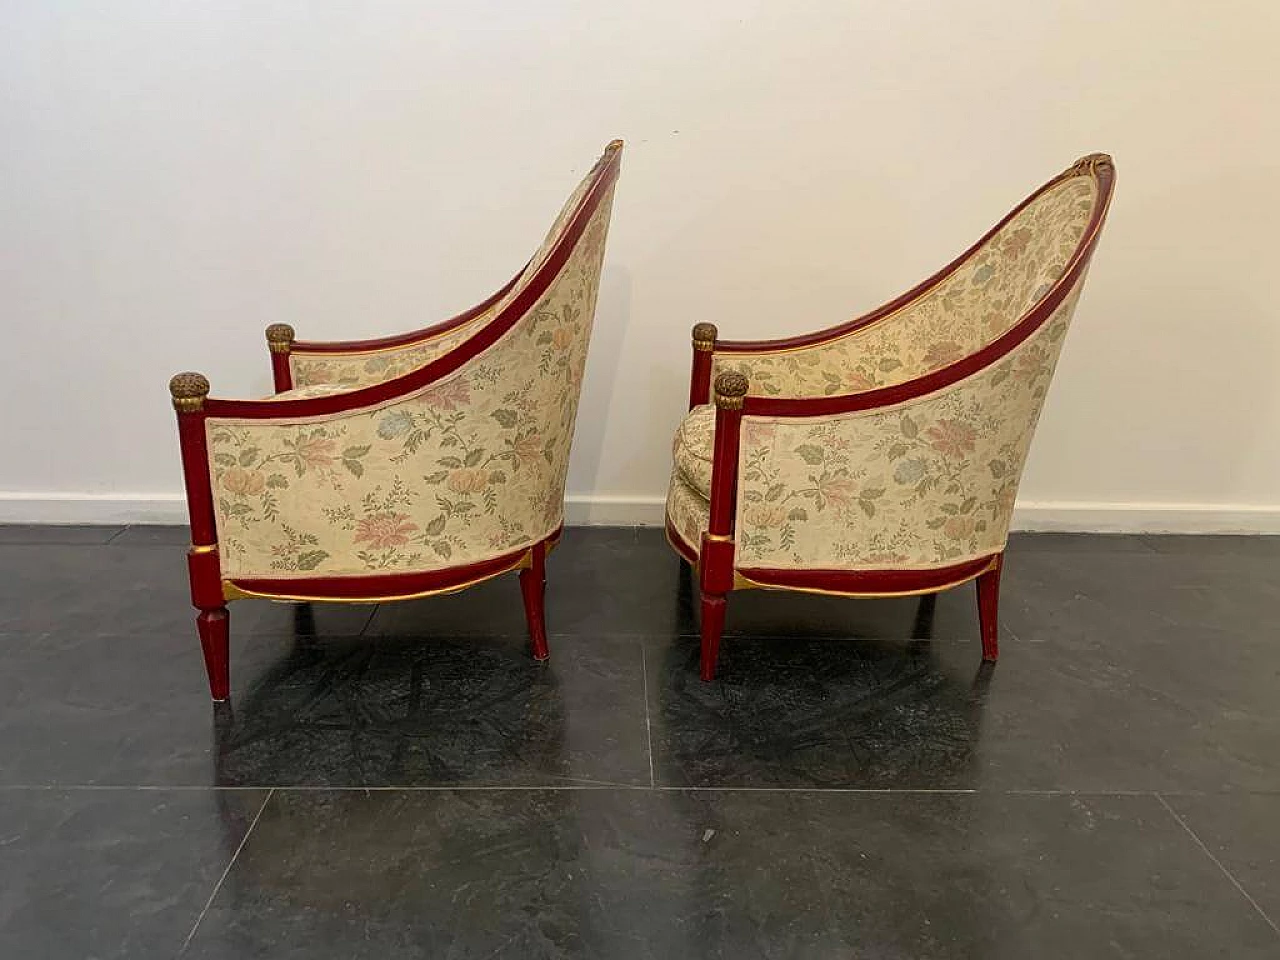 Pair of Art Deco red lacquered armchairs with carved details, 1930s 1444164